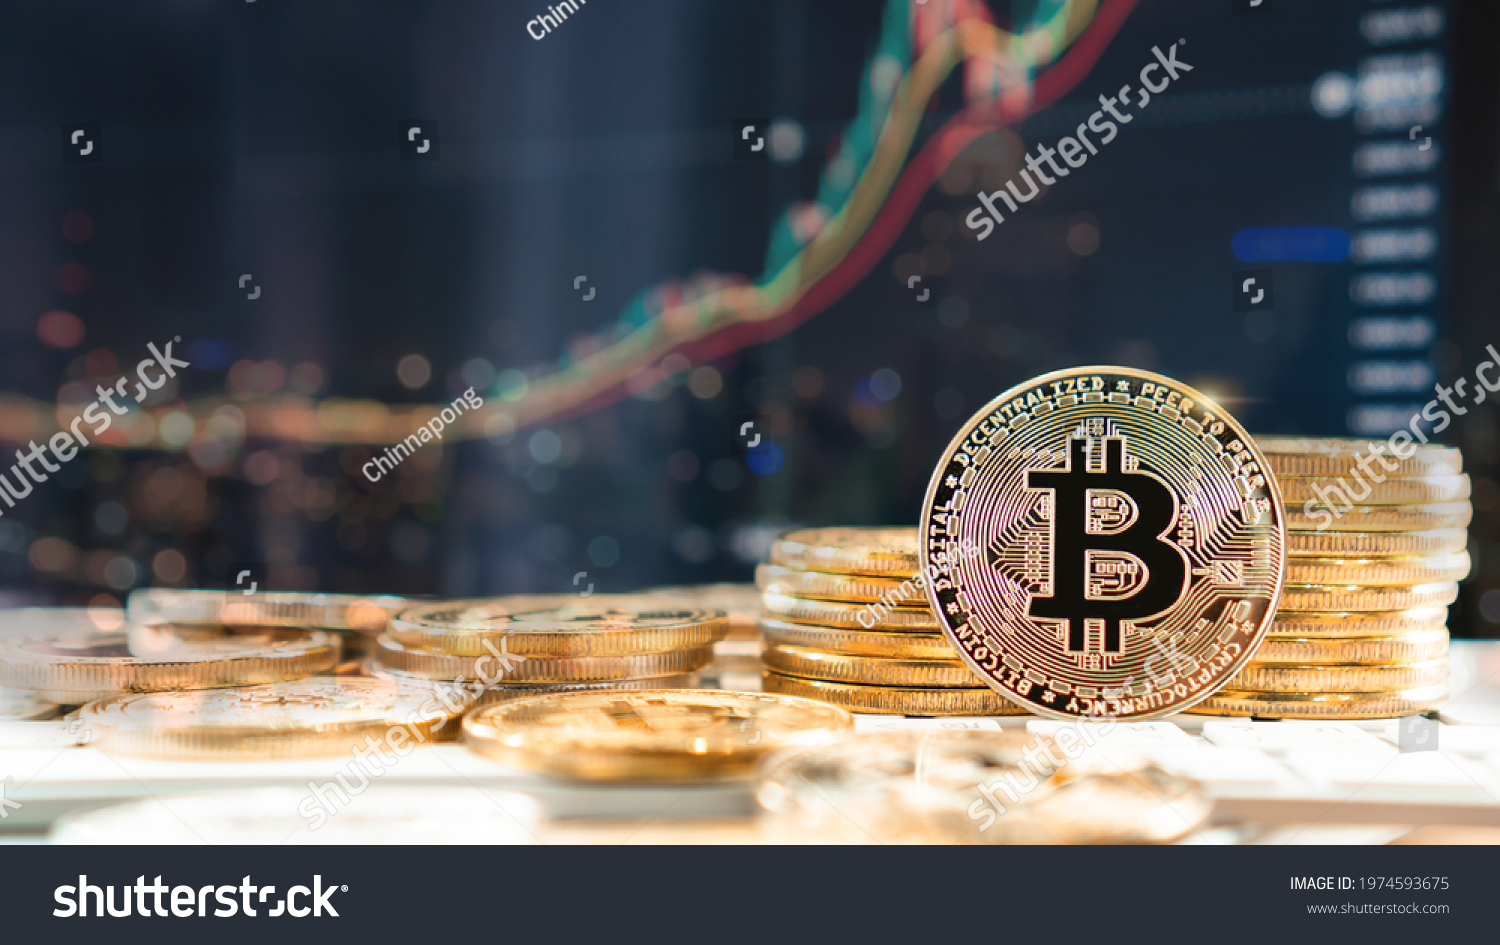 Bitcoin BTC cryptocurrency coin digital crypto currency token for defi decentralized financial banking p2p business and world stock exchange investment via internet online technology #1974593675